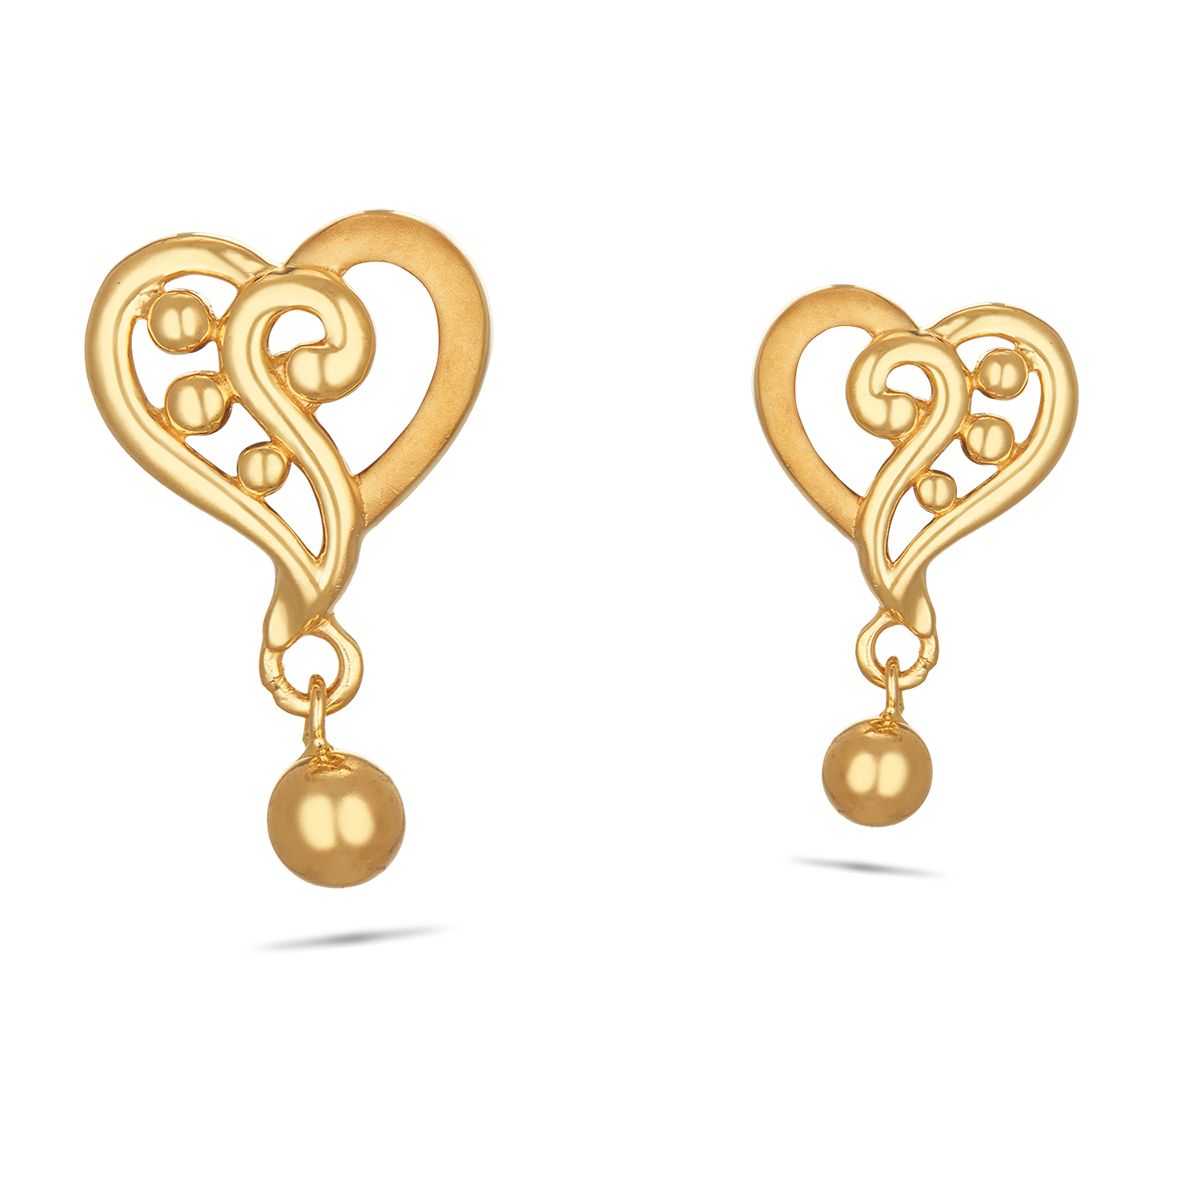 Buy New Daily Wear Light Weight Gold Inspired Earrings Gold Covering  Jewellery